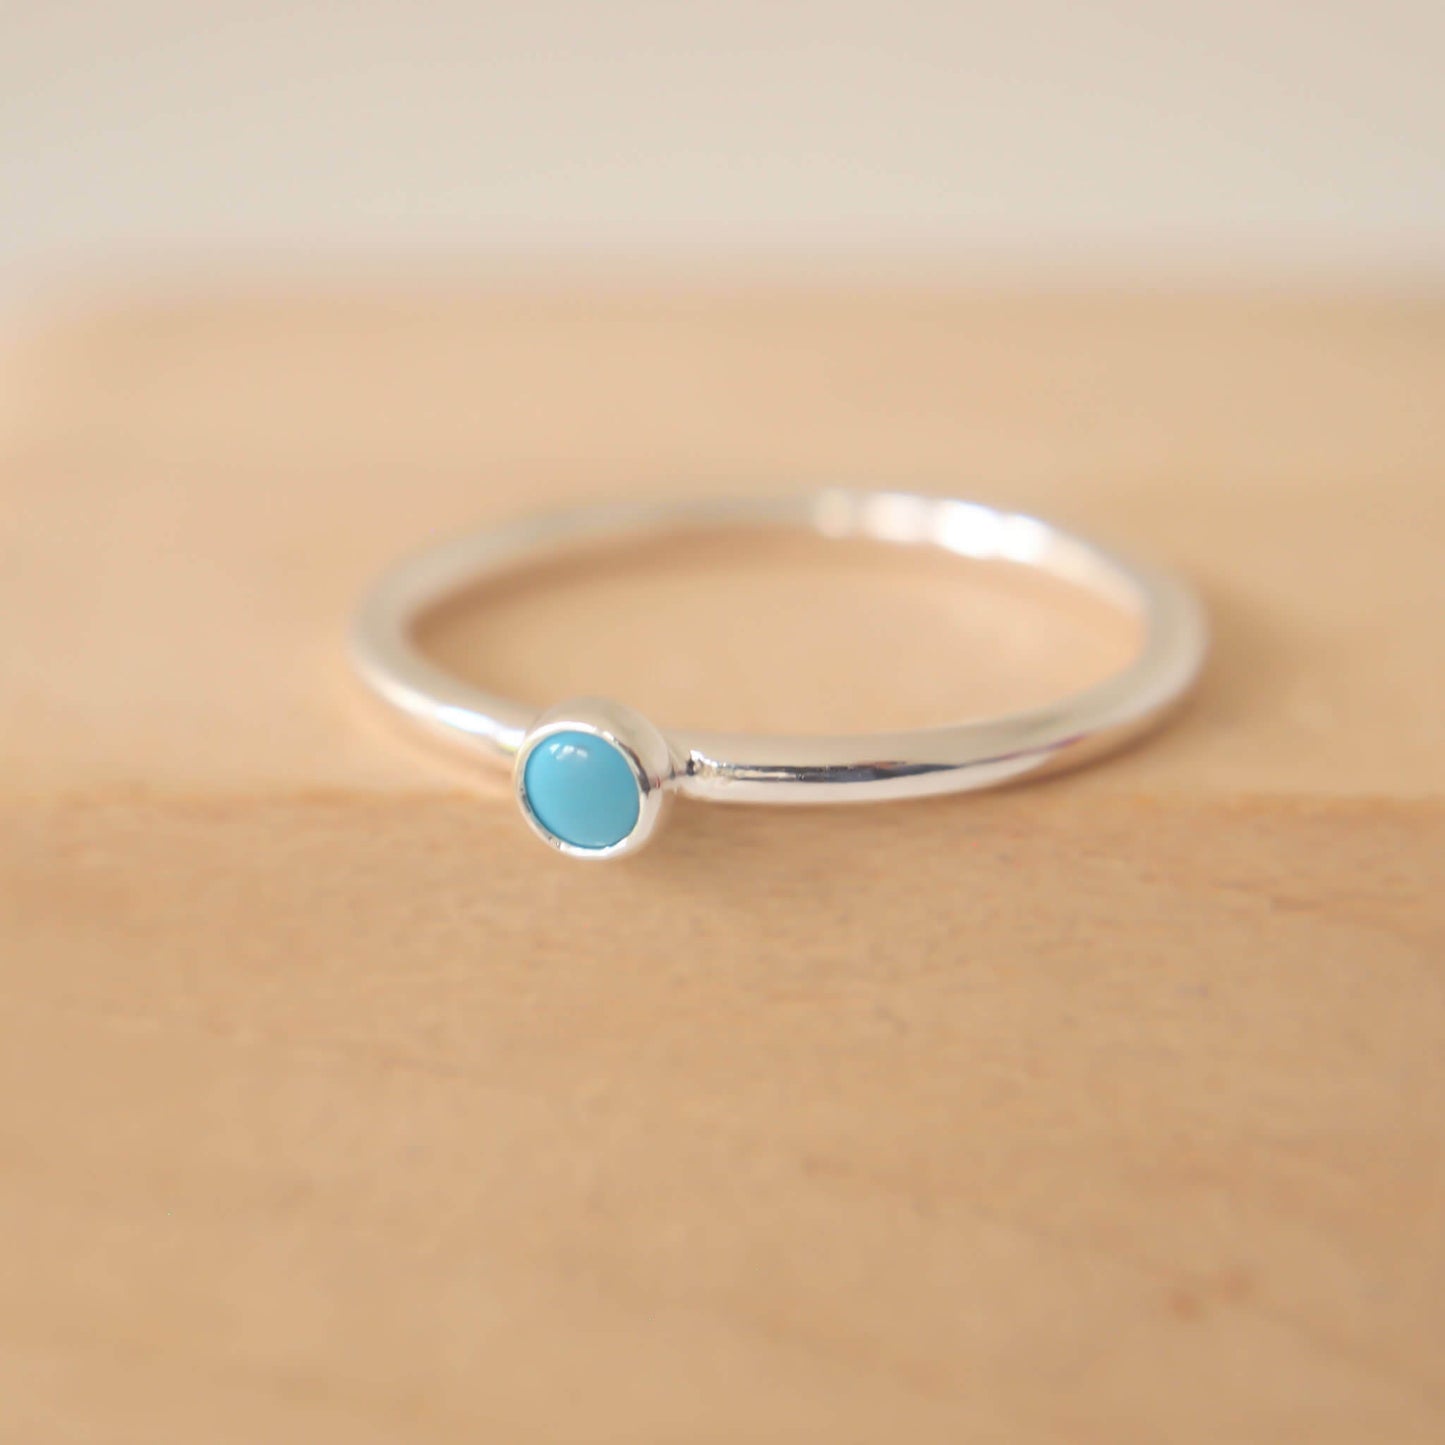 Turquoise and Sterling Silver Ring made from a small 3mm round turquoise gemstone set simply onto a modern band of round wire. Handmade to your ring size by maram jewellery in Scotland